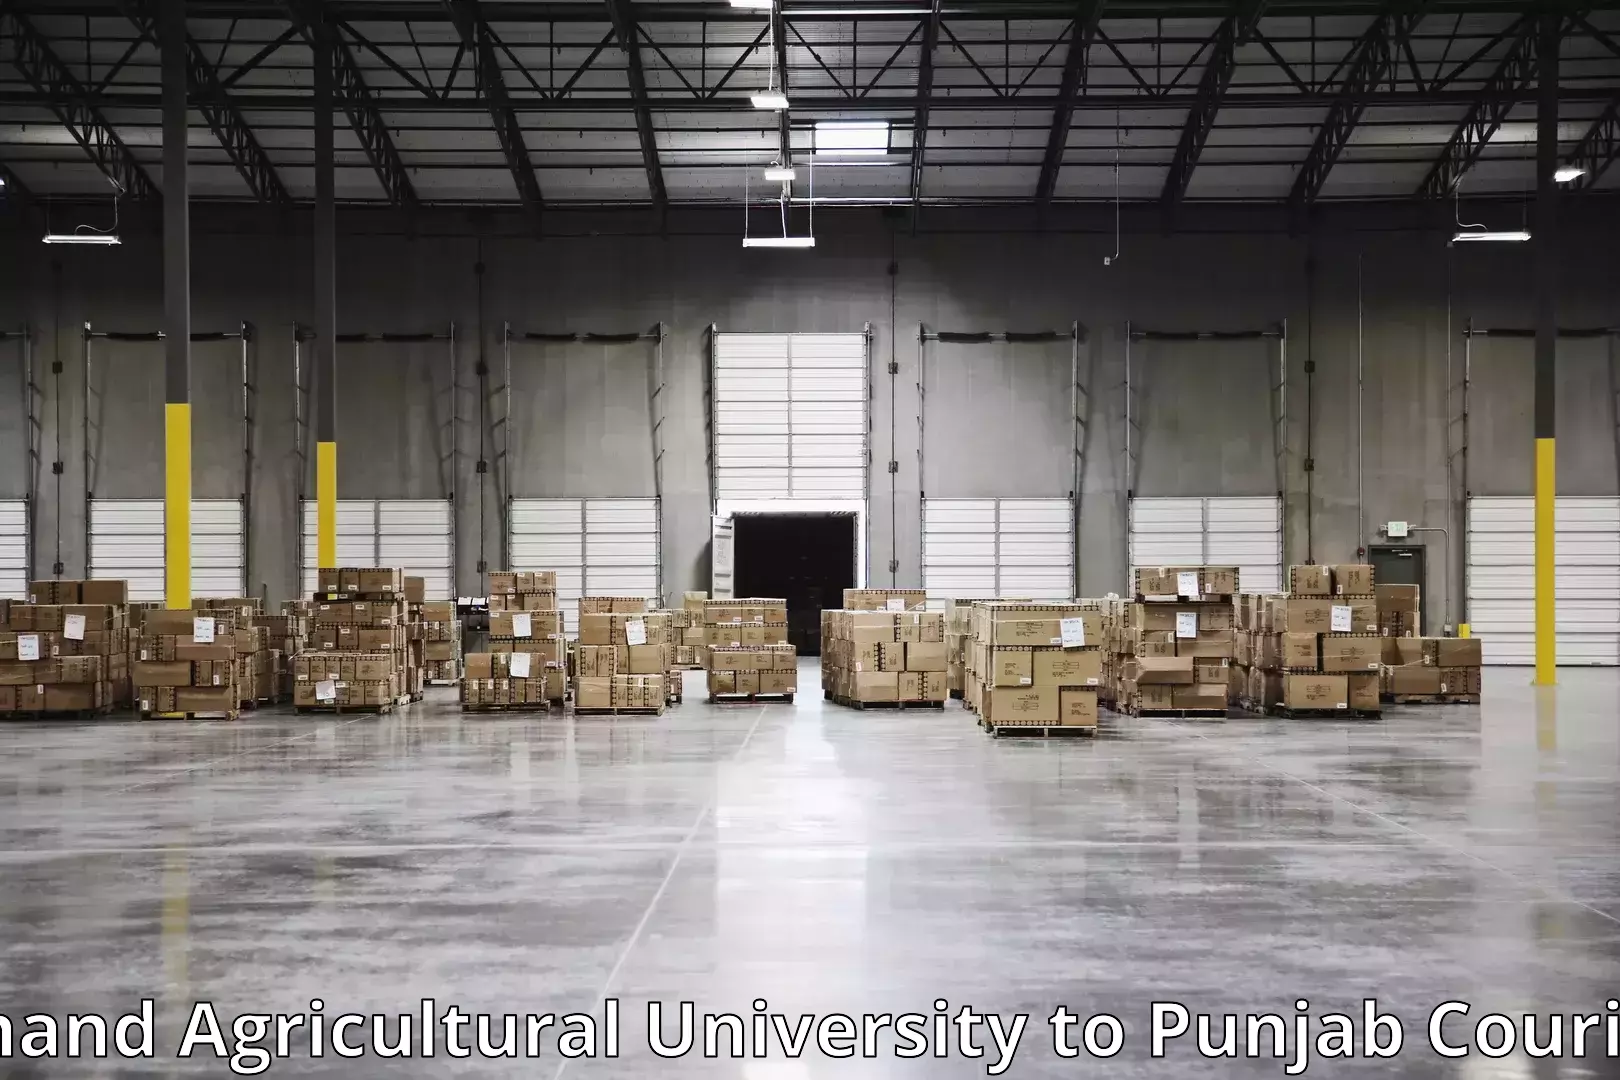 Trusted moving company Anand Agricultural University to Punjab